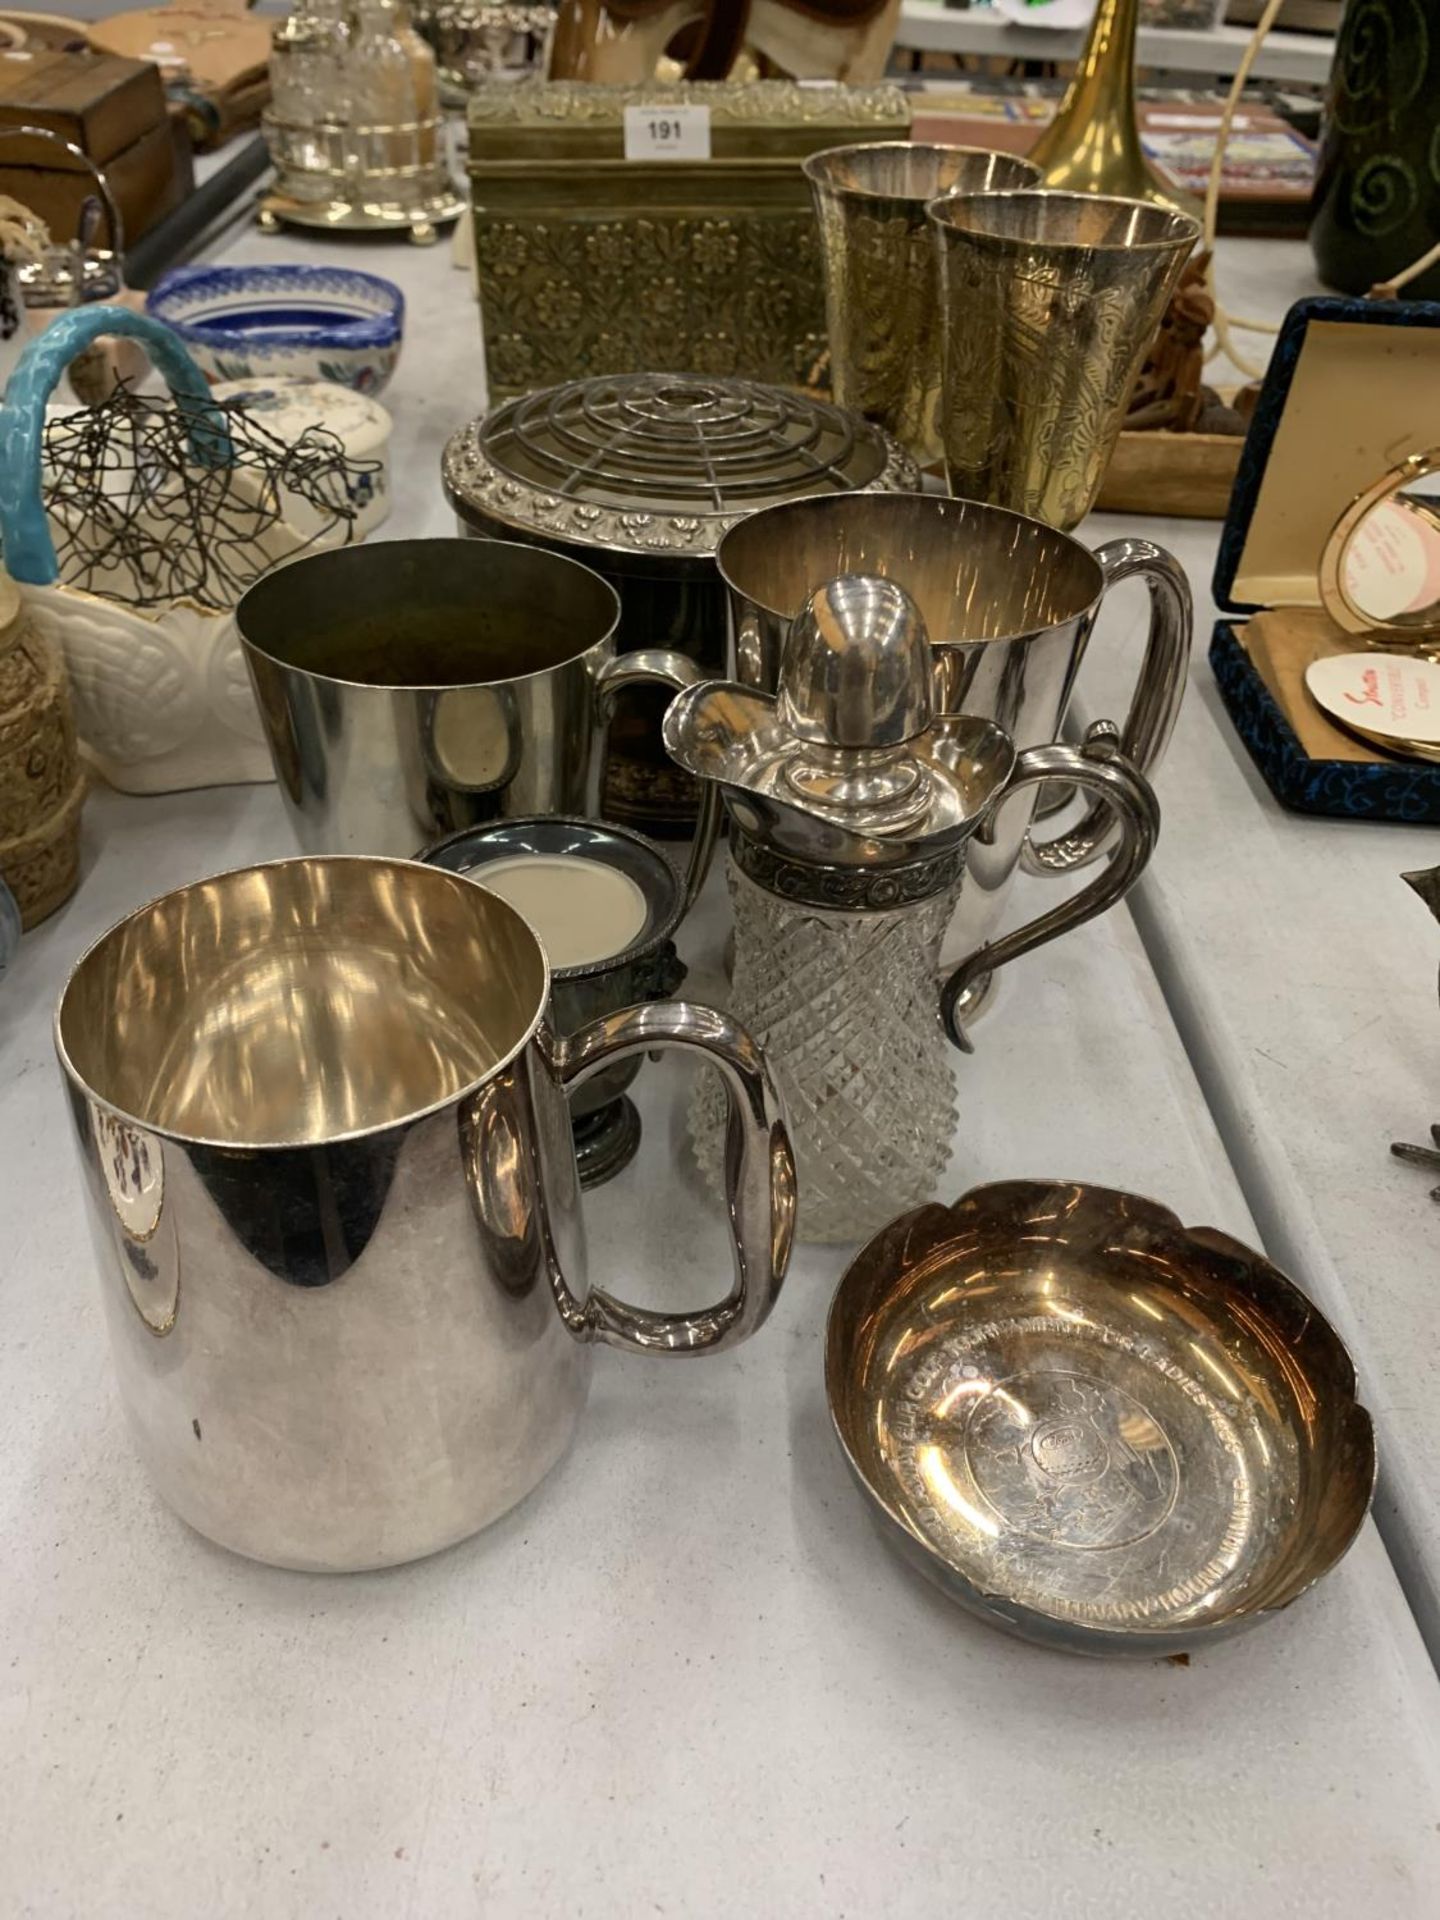 A QUANTITY OF SILVER PLATED ITEMS TO INCLUDE GOBLETS, TANKARDS, A ROSE BOWL, ETC